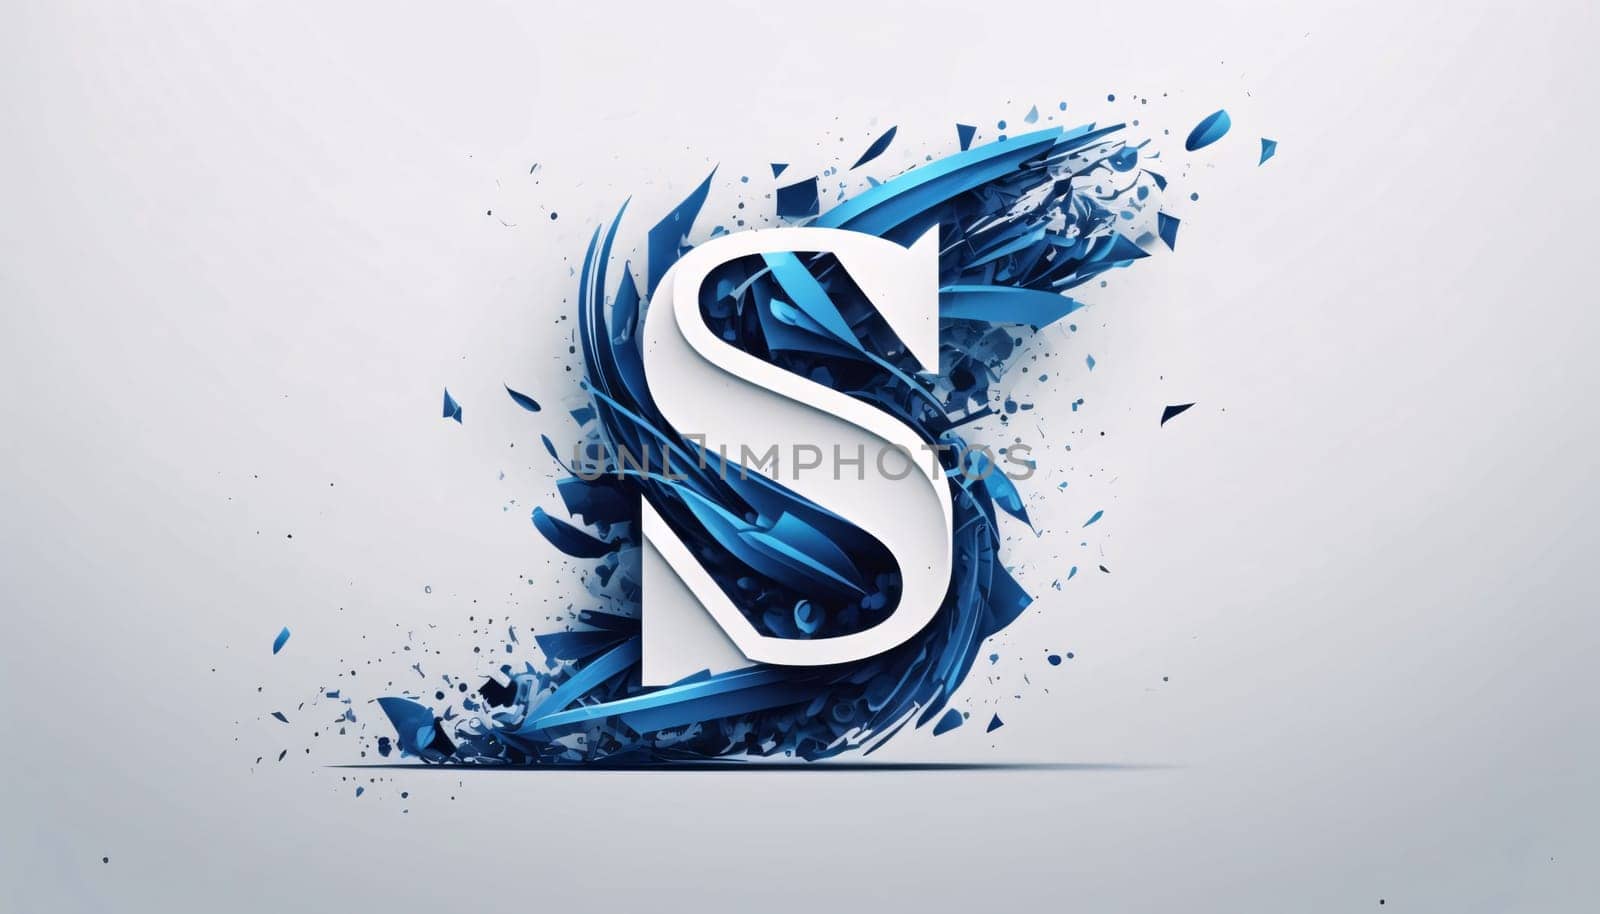 Graphic alphabet letters: Letter S made of blue paint splashes on white background. 3D rendering